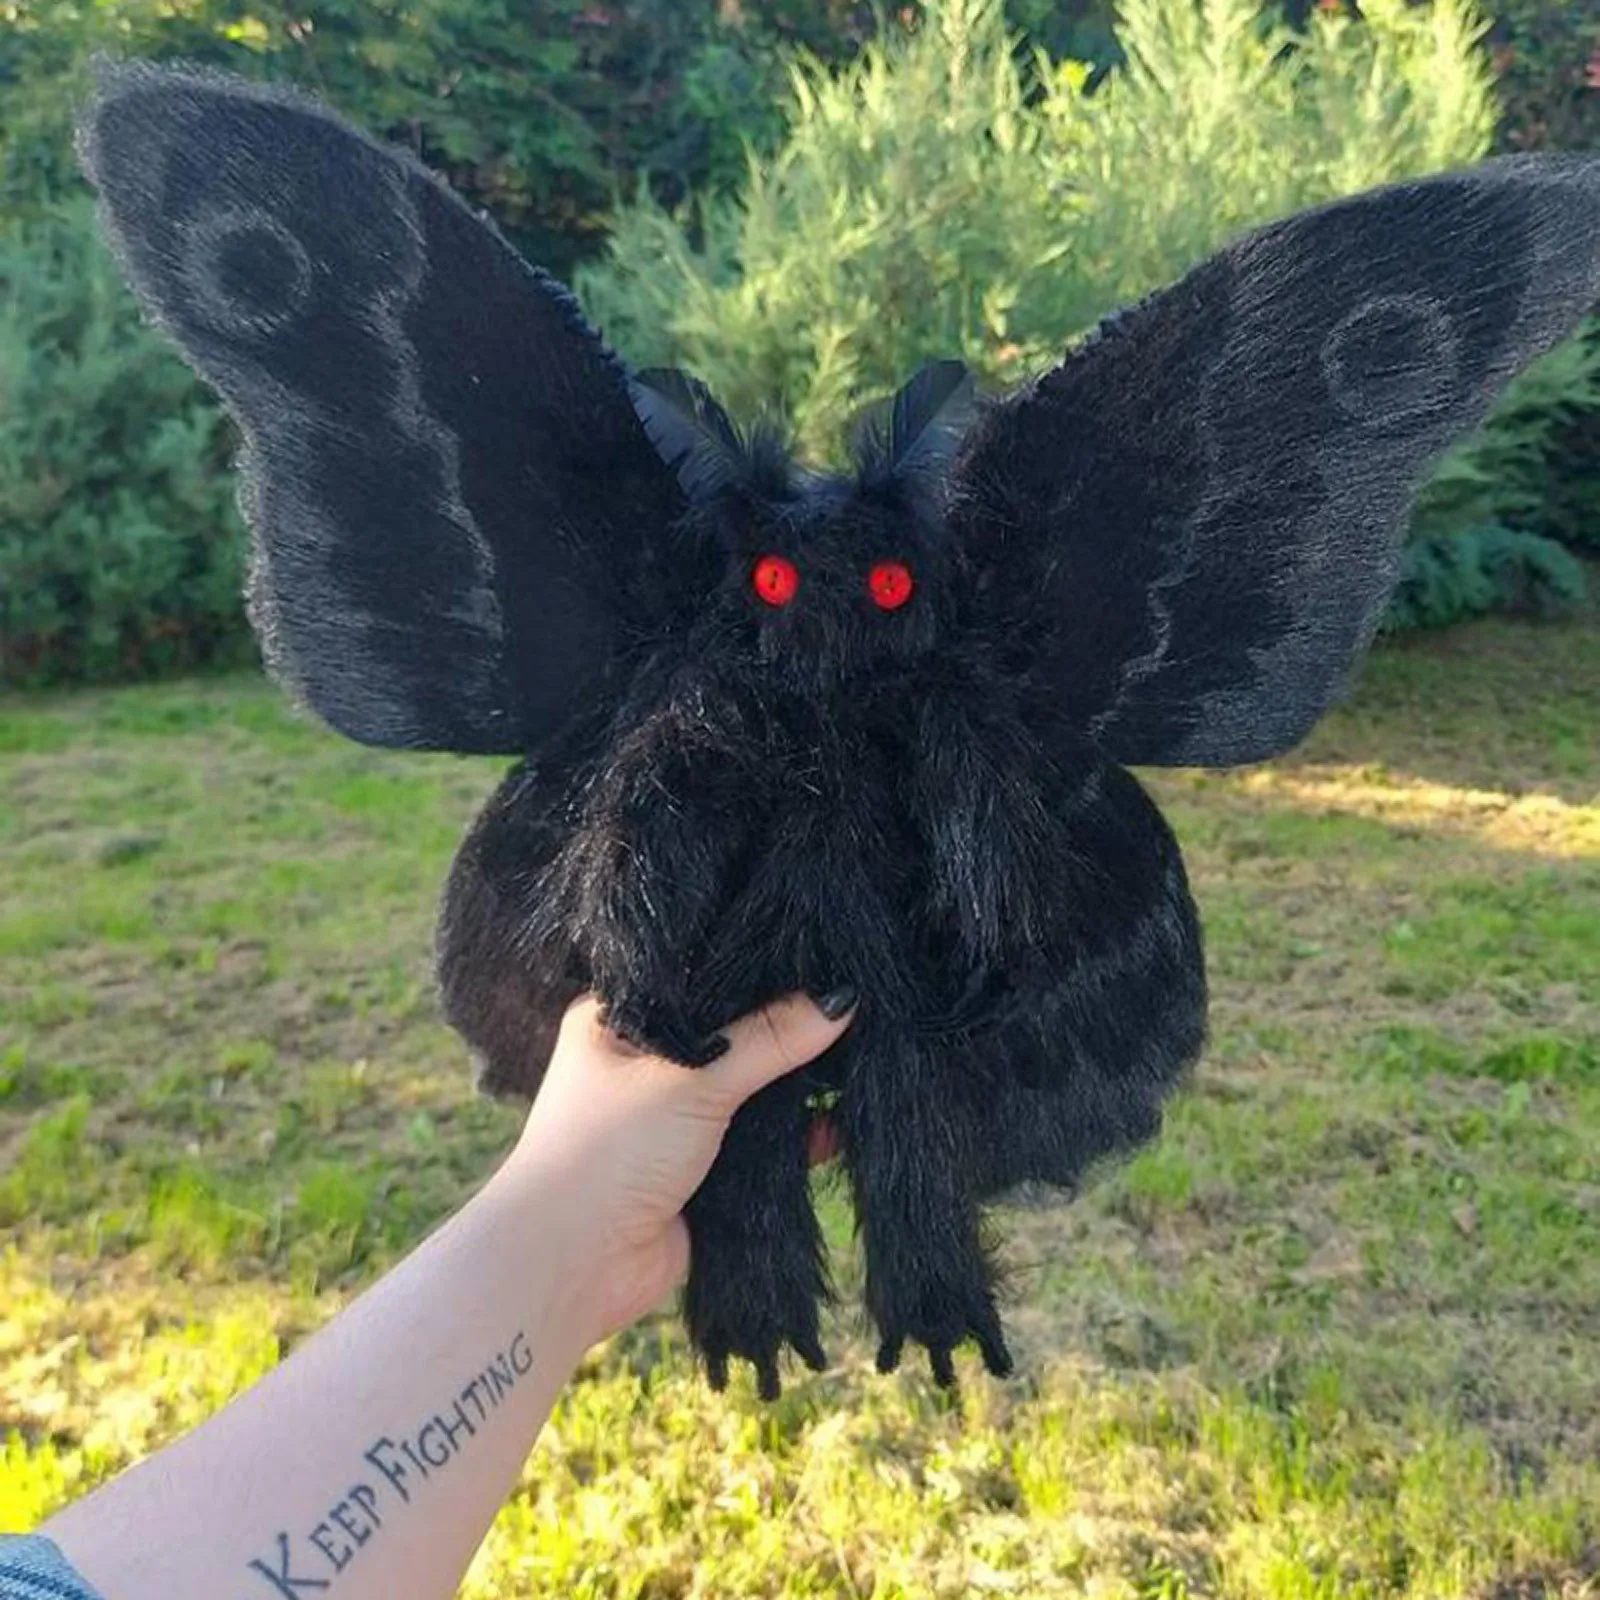 Gothic Mothman Plushie Is Looking For A Love And Magical Vividly Stuffed Dolls Plush Animal Novel Plush Toy Home Gift For Kid